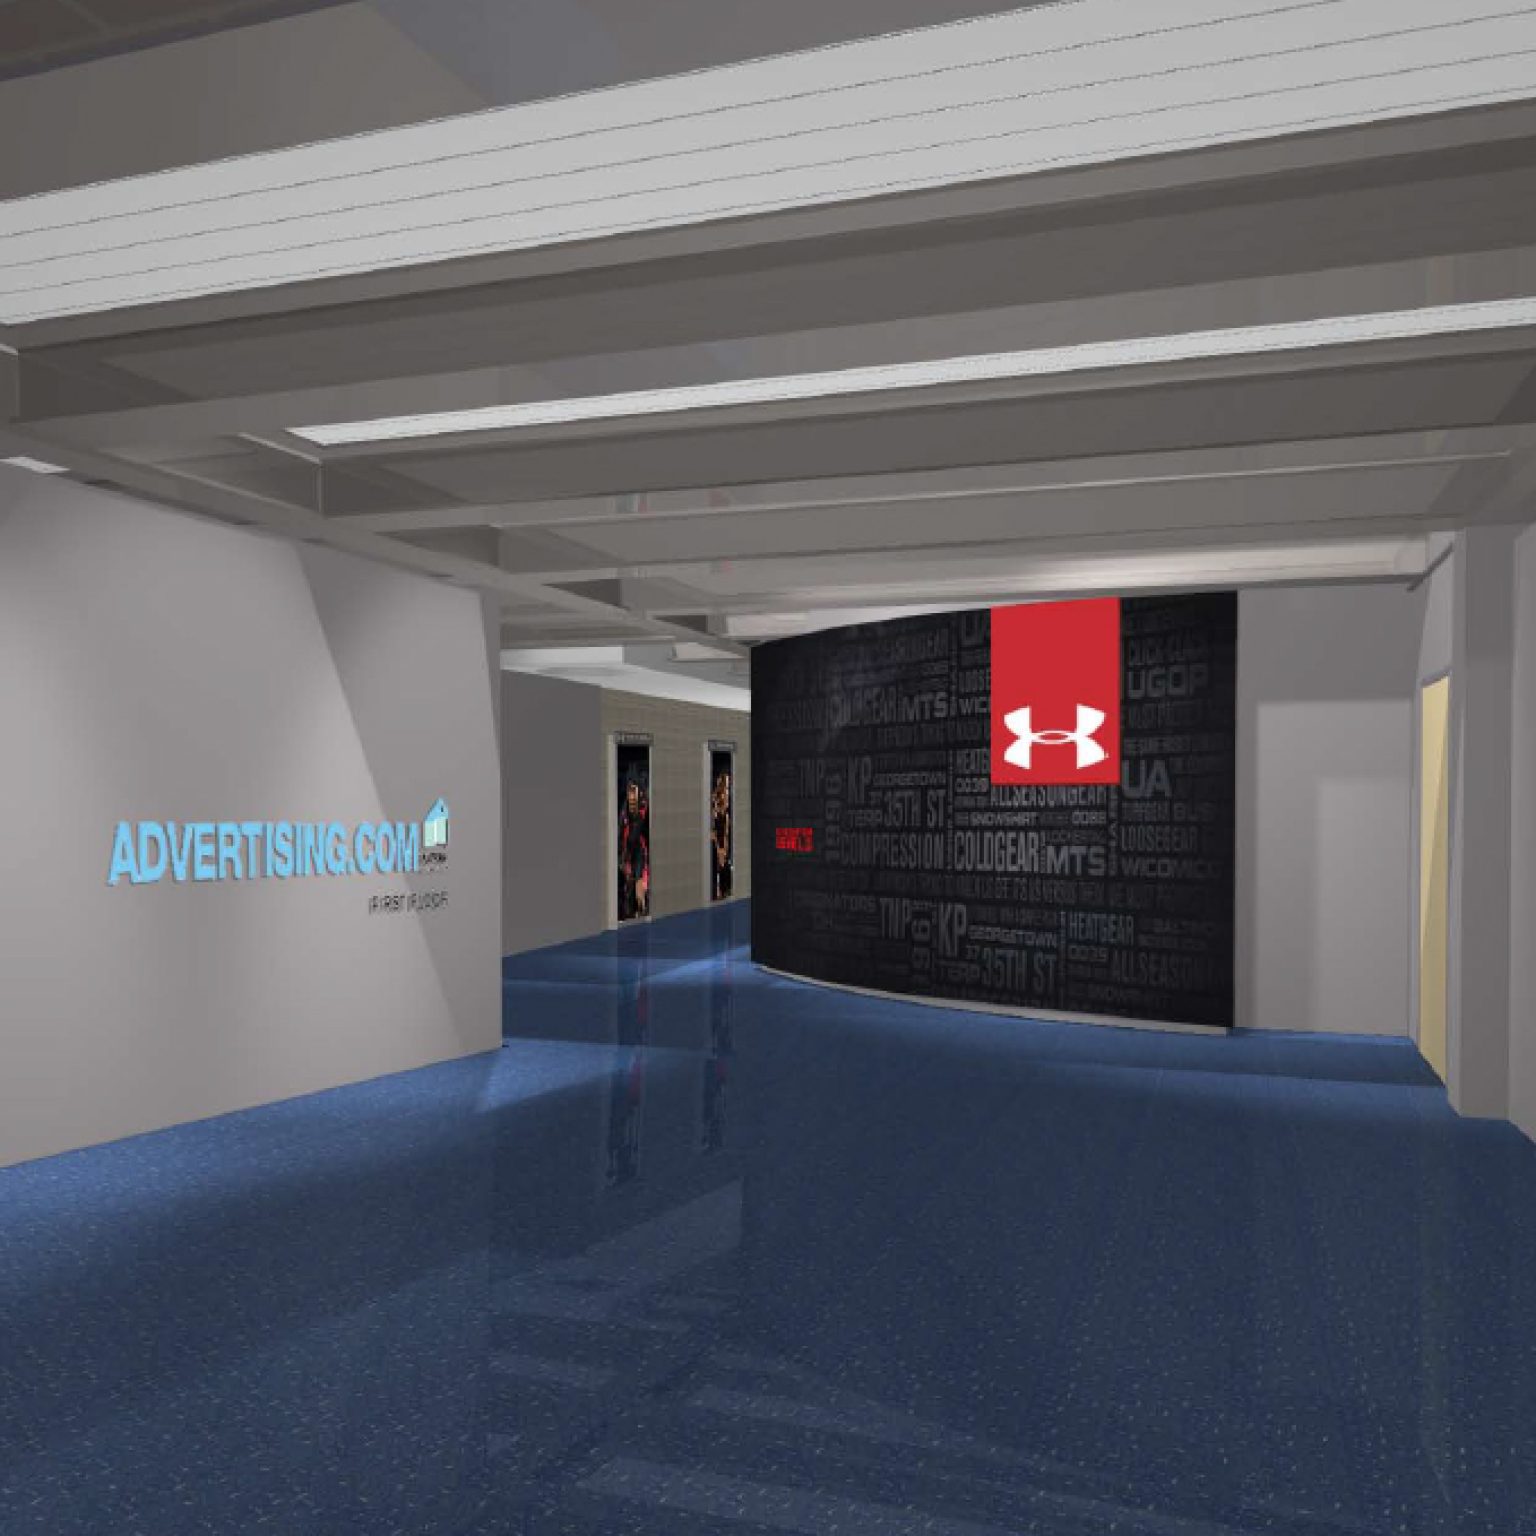 Lobby signage for UnderArmour